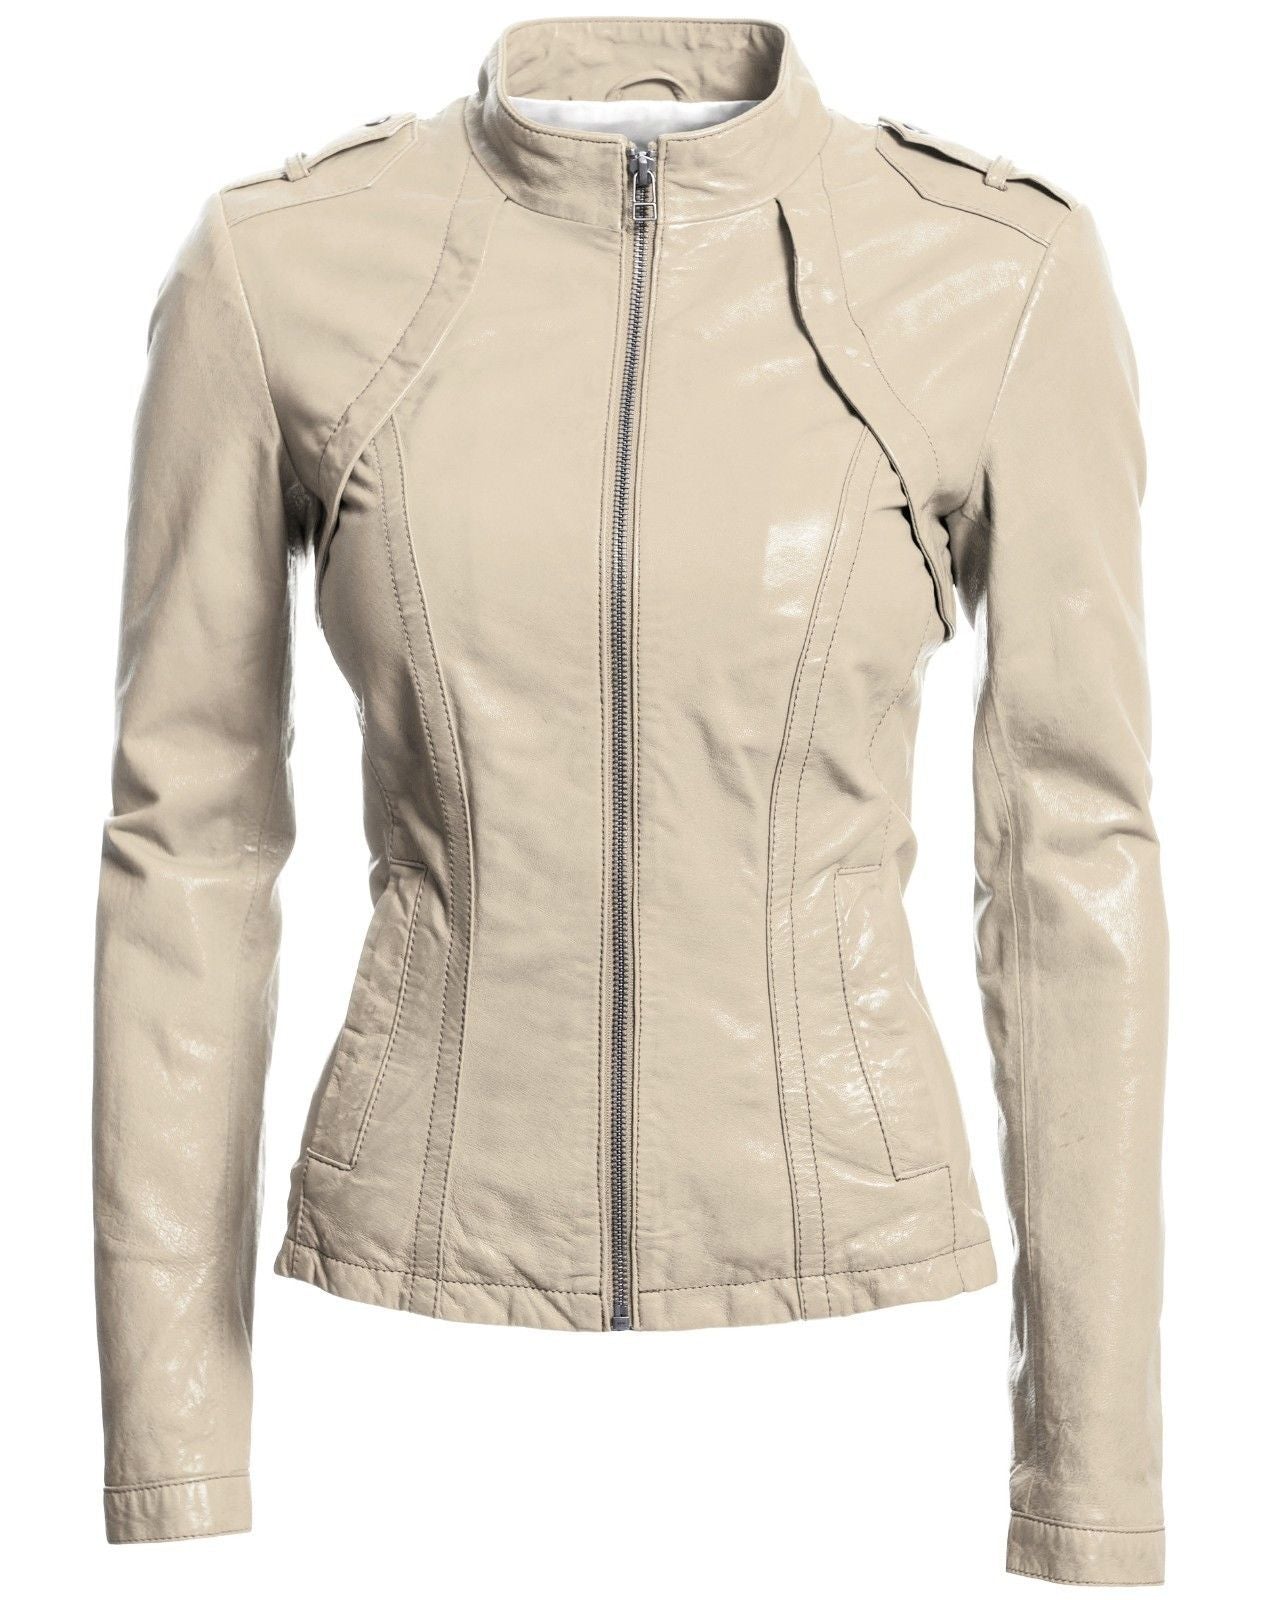 Women's Beige Fitted Leather Jacket ST0326